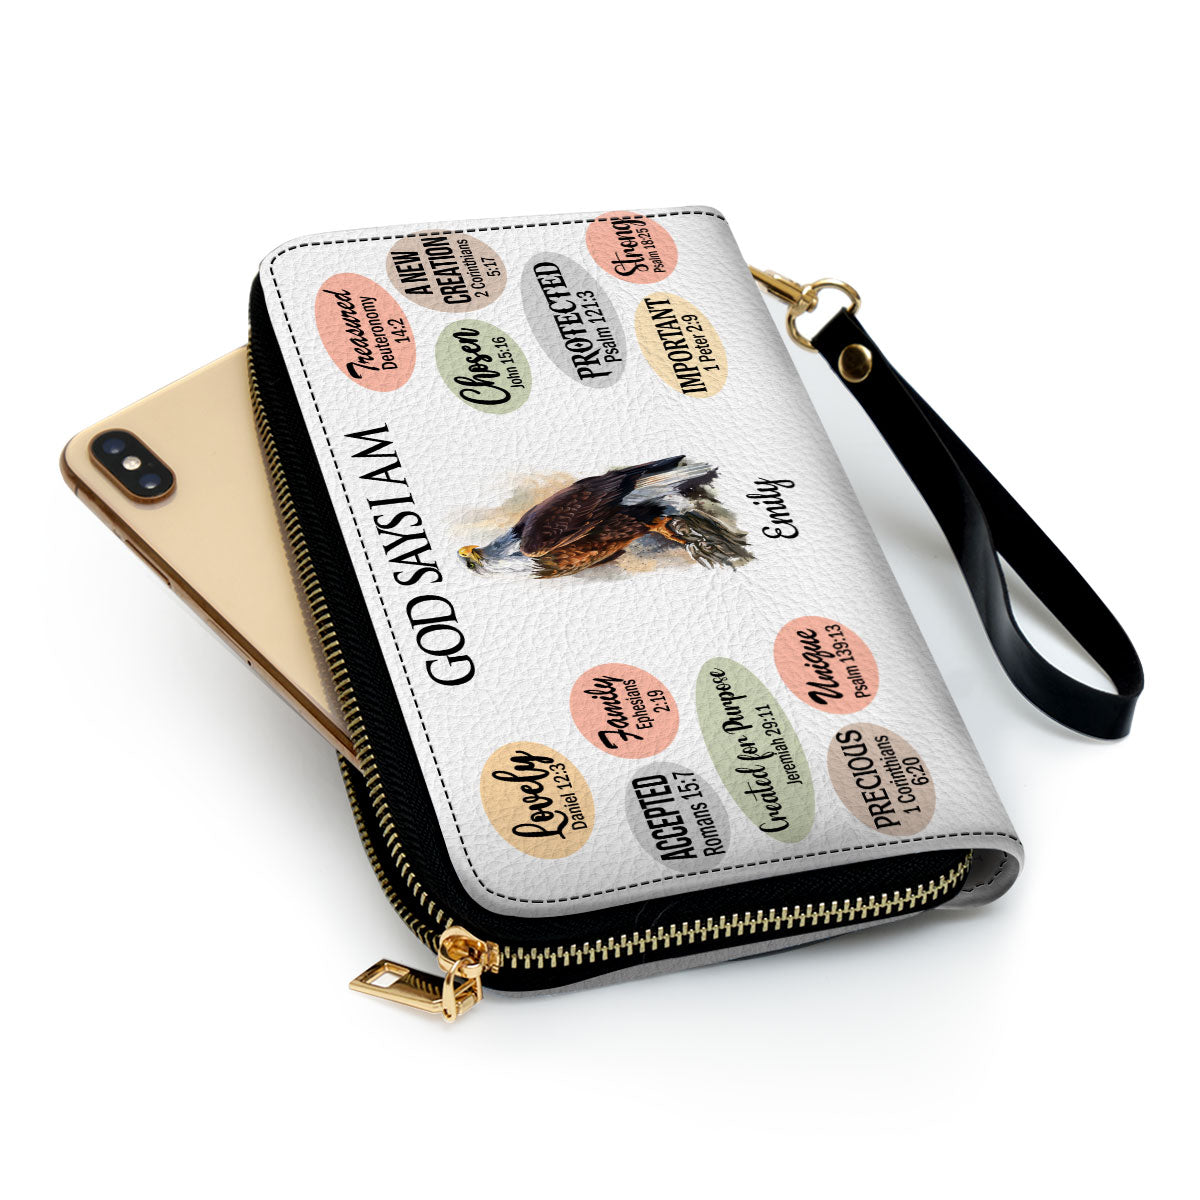 Animal Inspirational Gifts For Women Of God What God Says About You Clutch Purse For Women - Personalized Name - Christian Gifts For Women